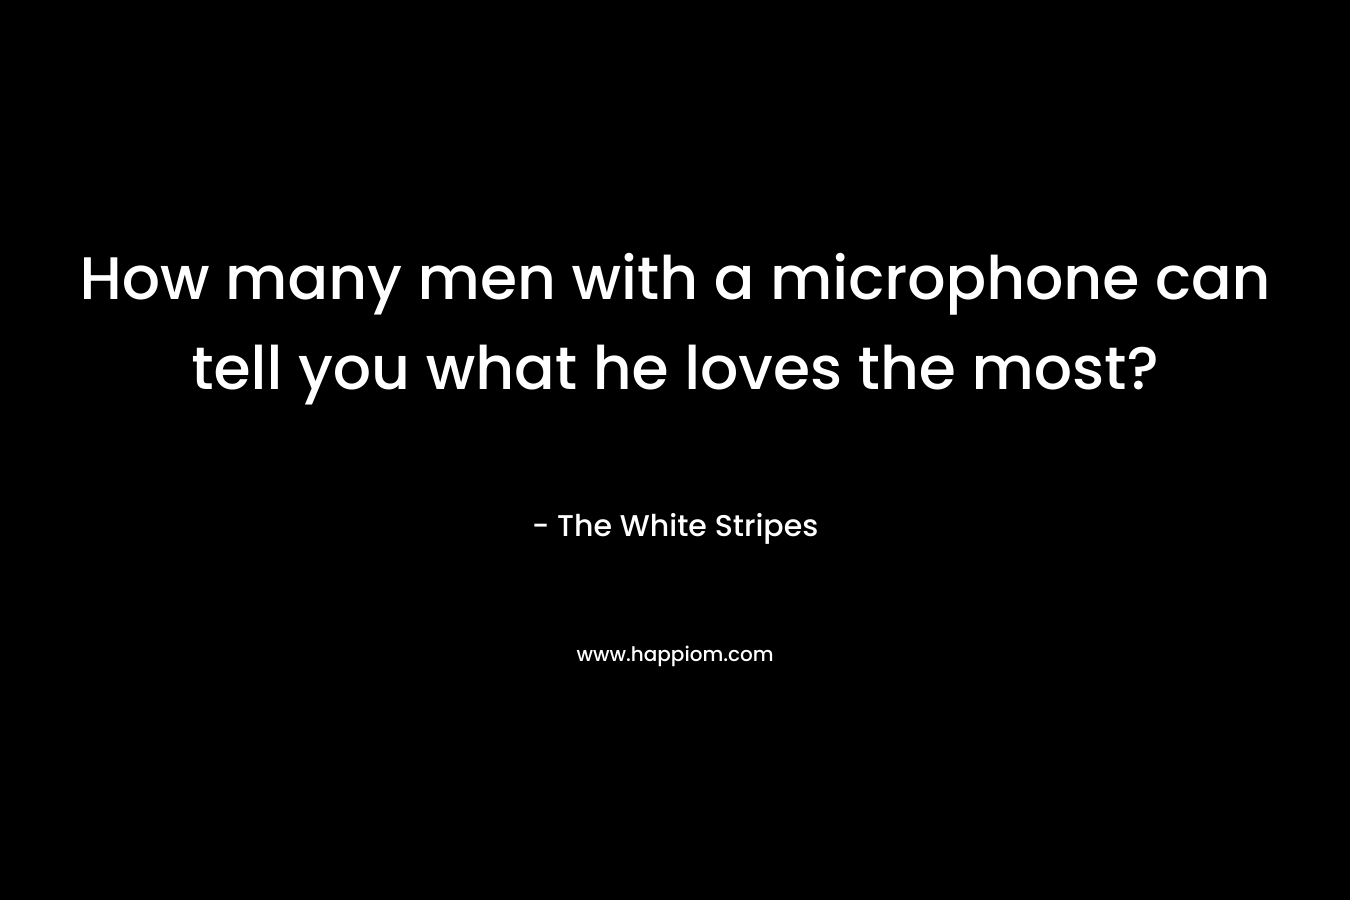 How many men with a microphone can tell you what he loves the most?